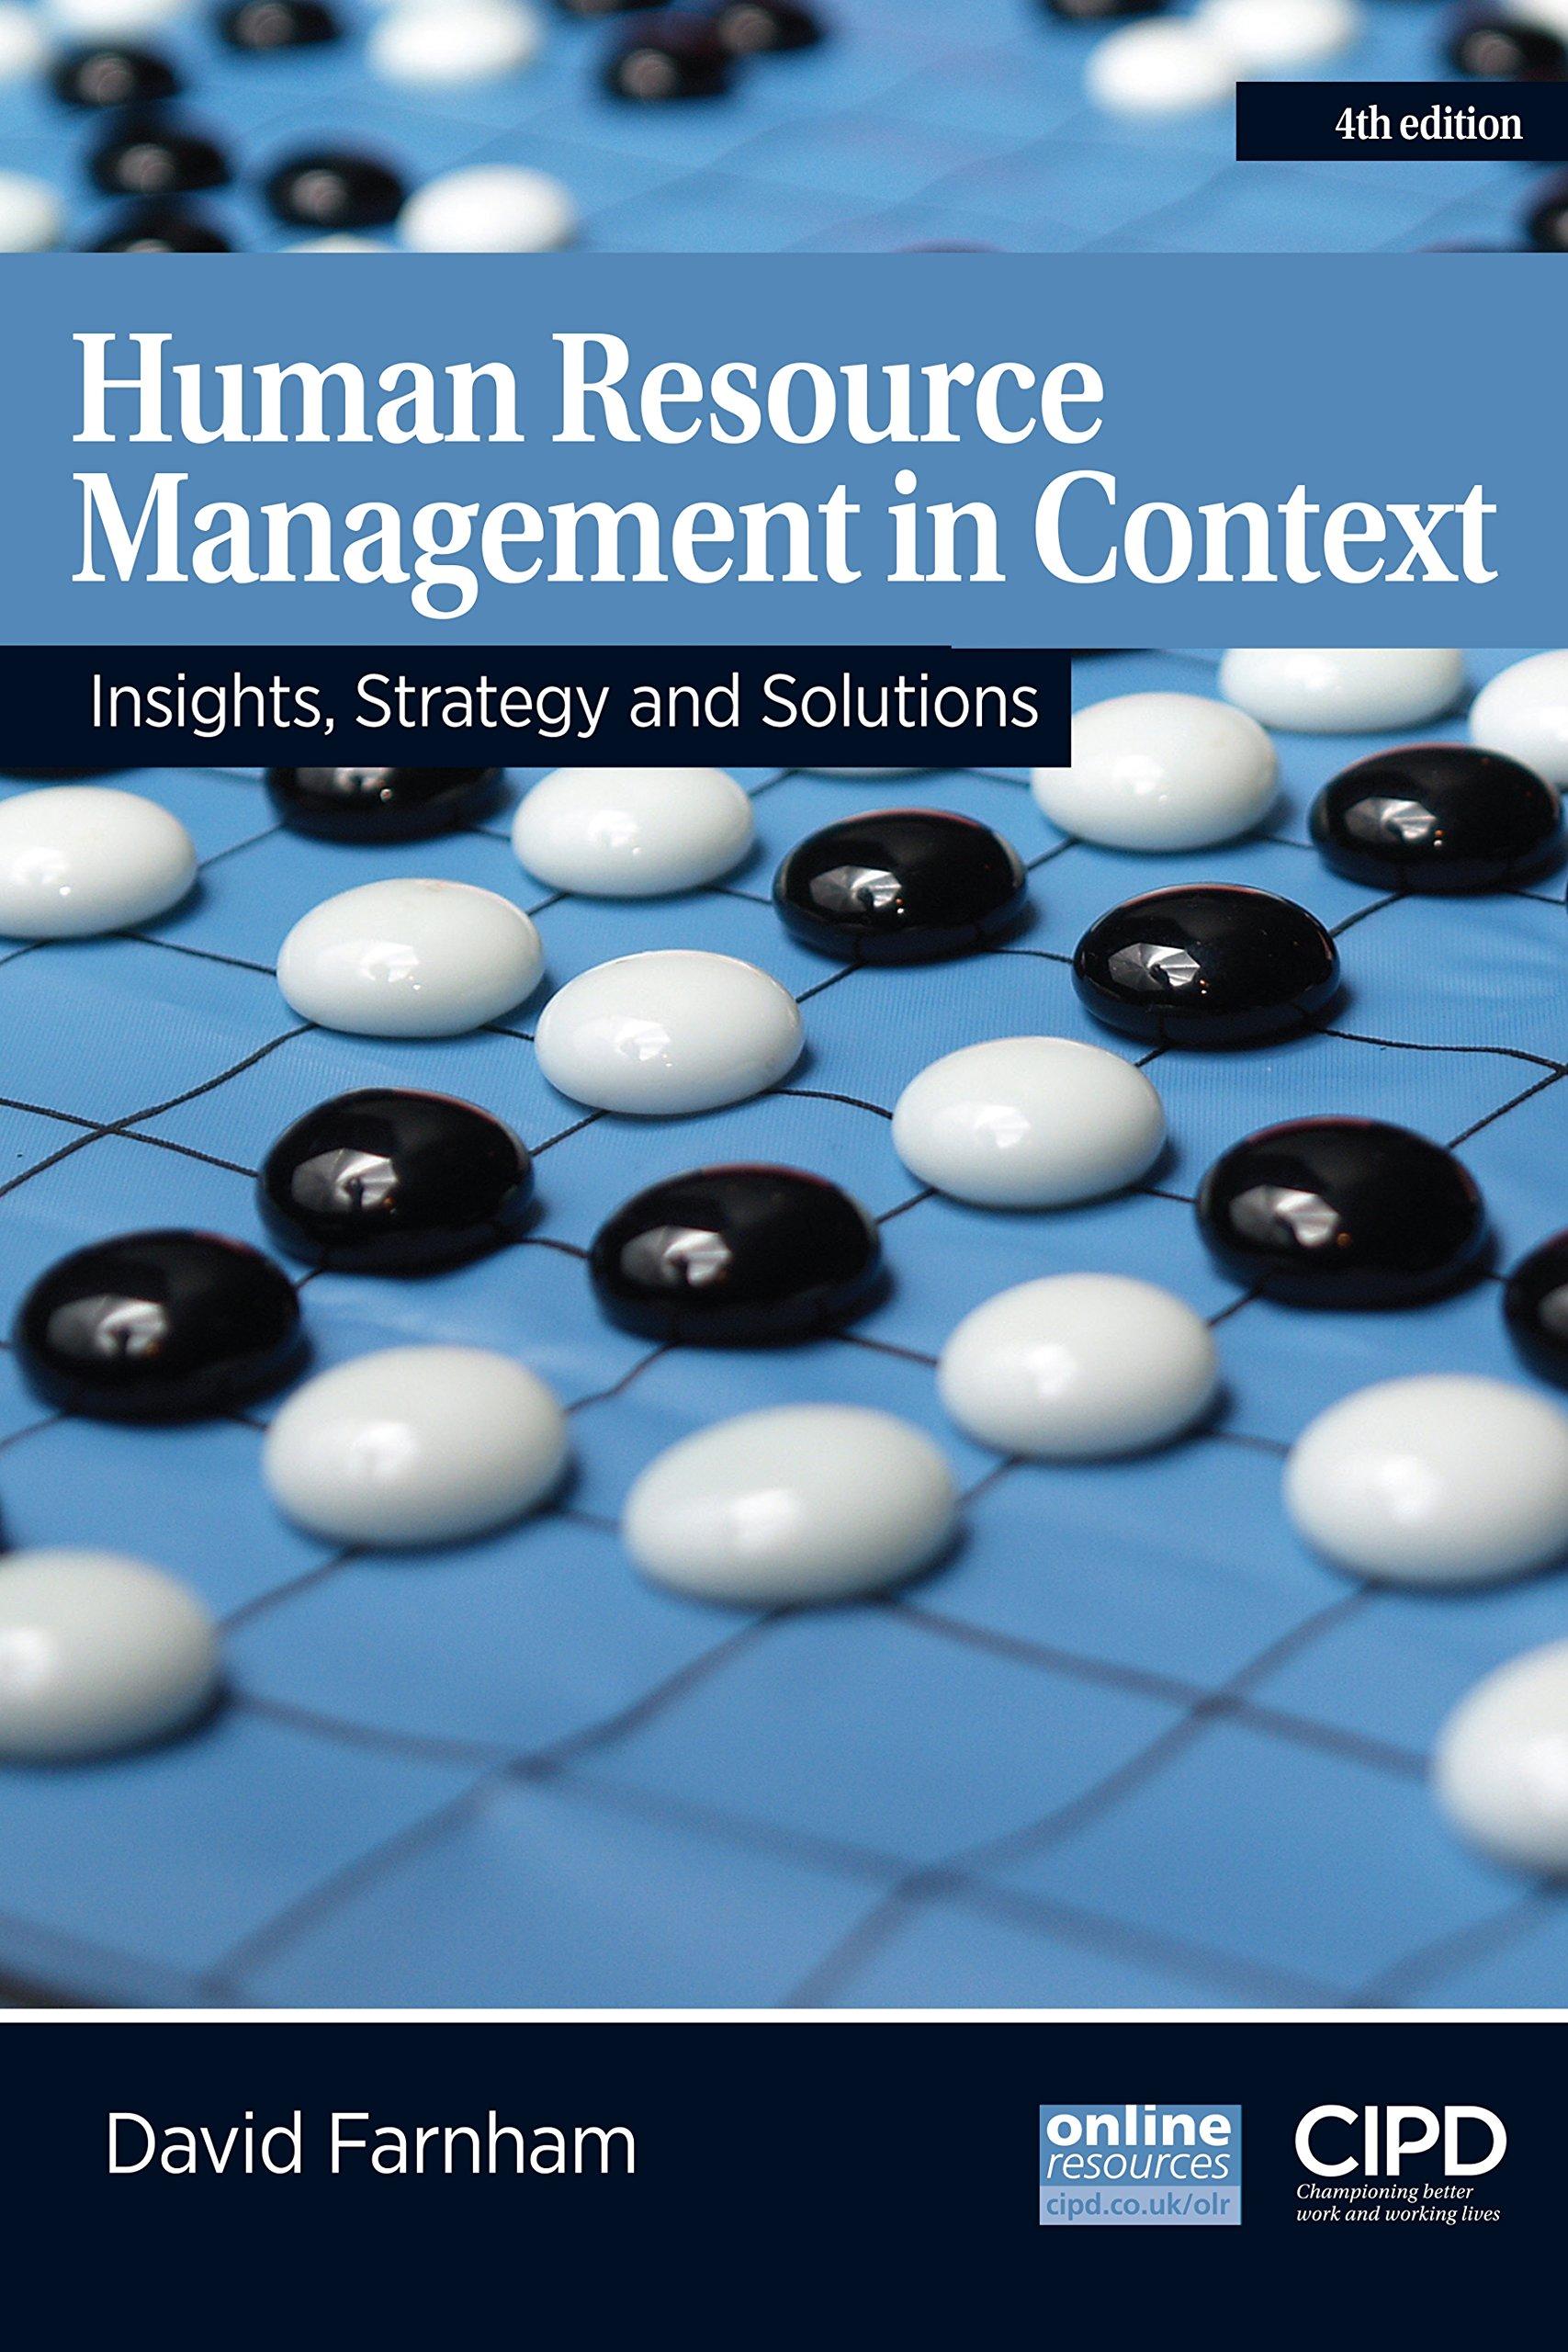 human resource management in context insights strategy and solutions 4th edition david farnham 1843983583,